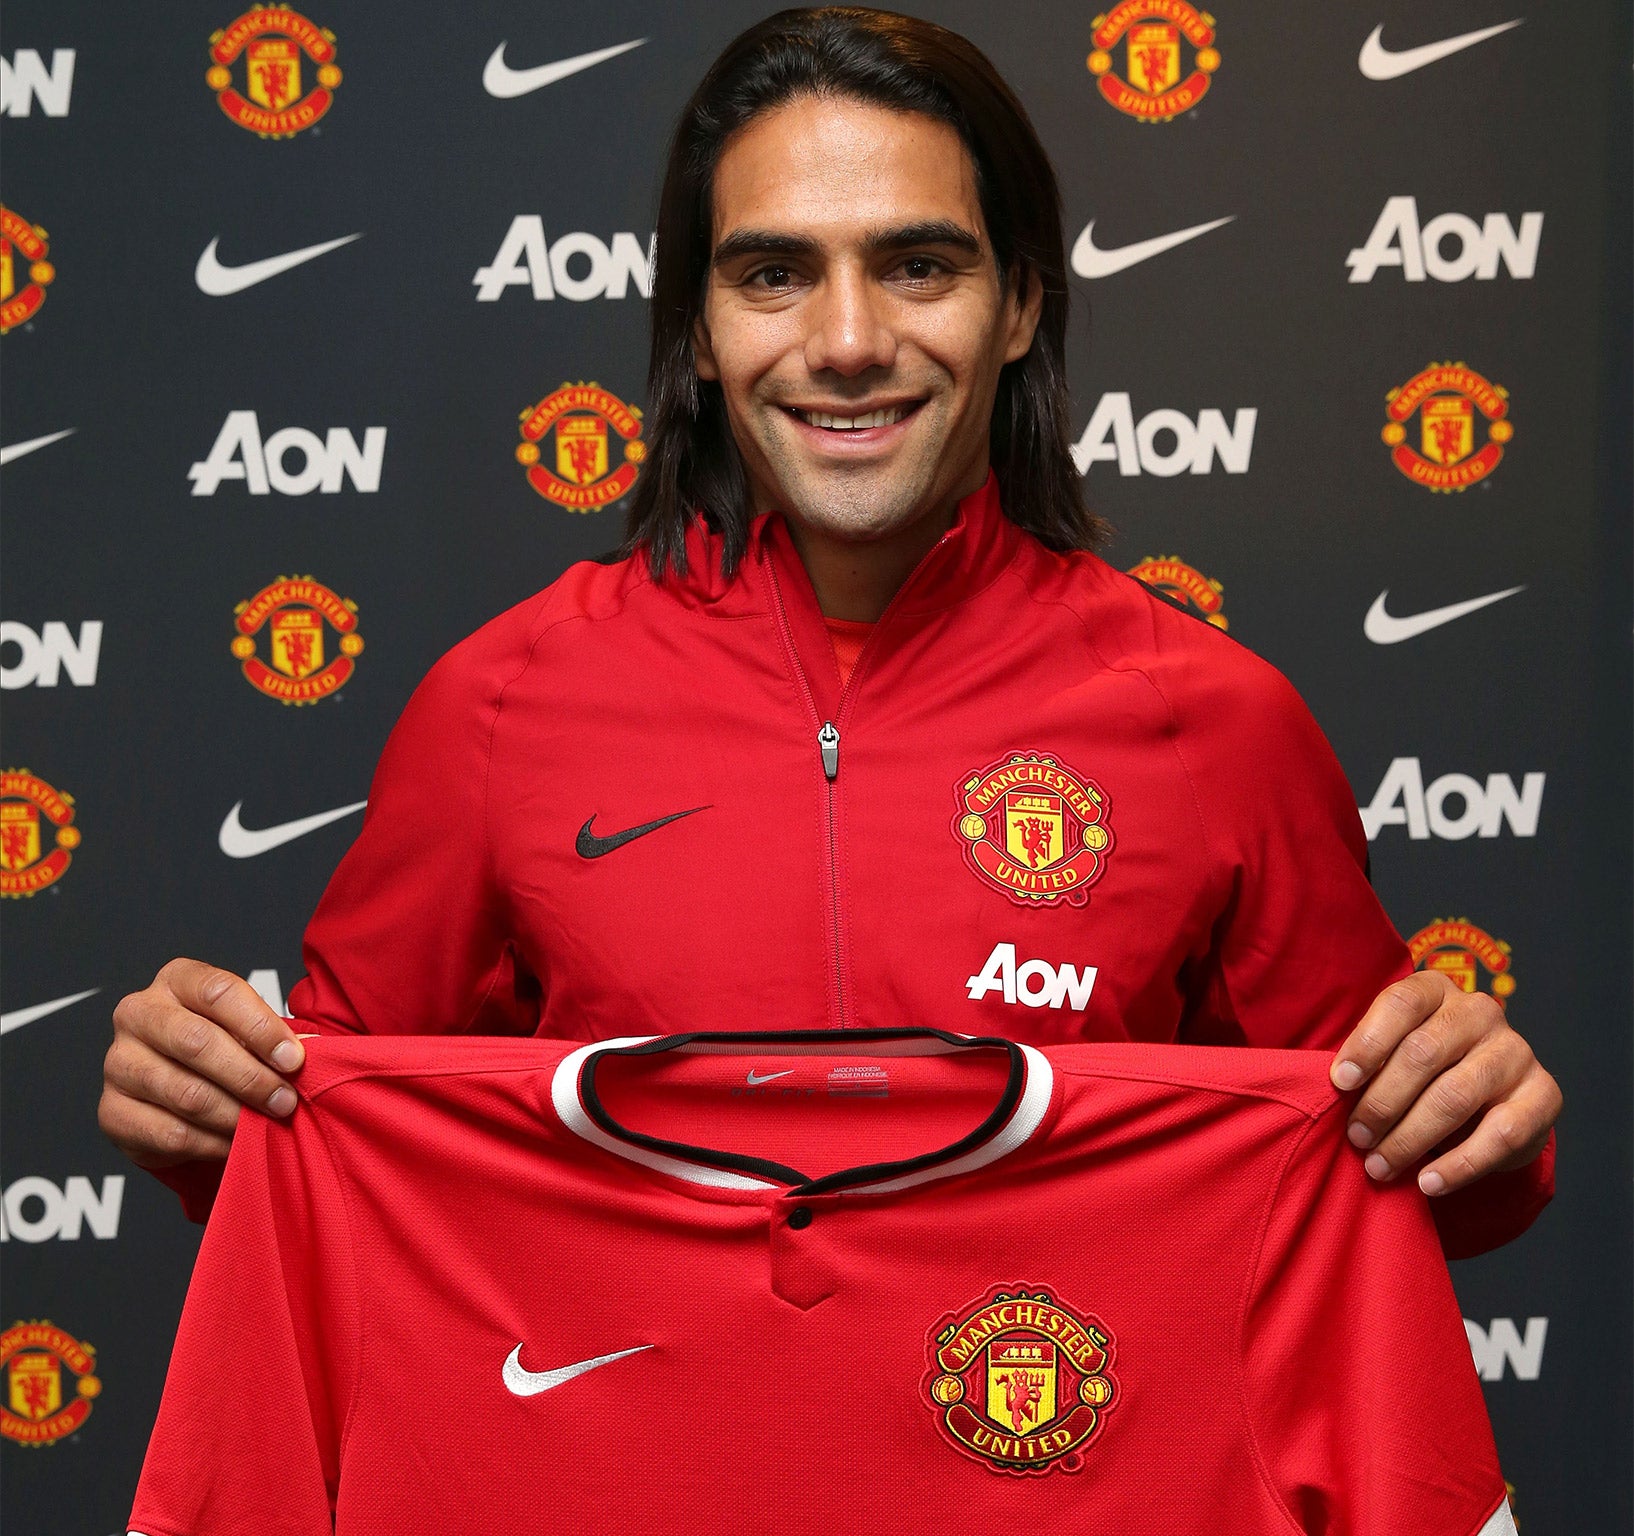 falcao jersey number